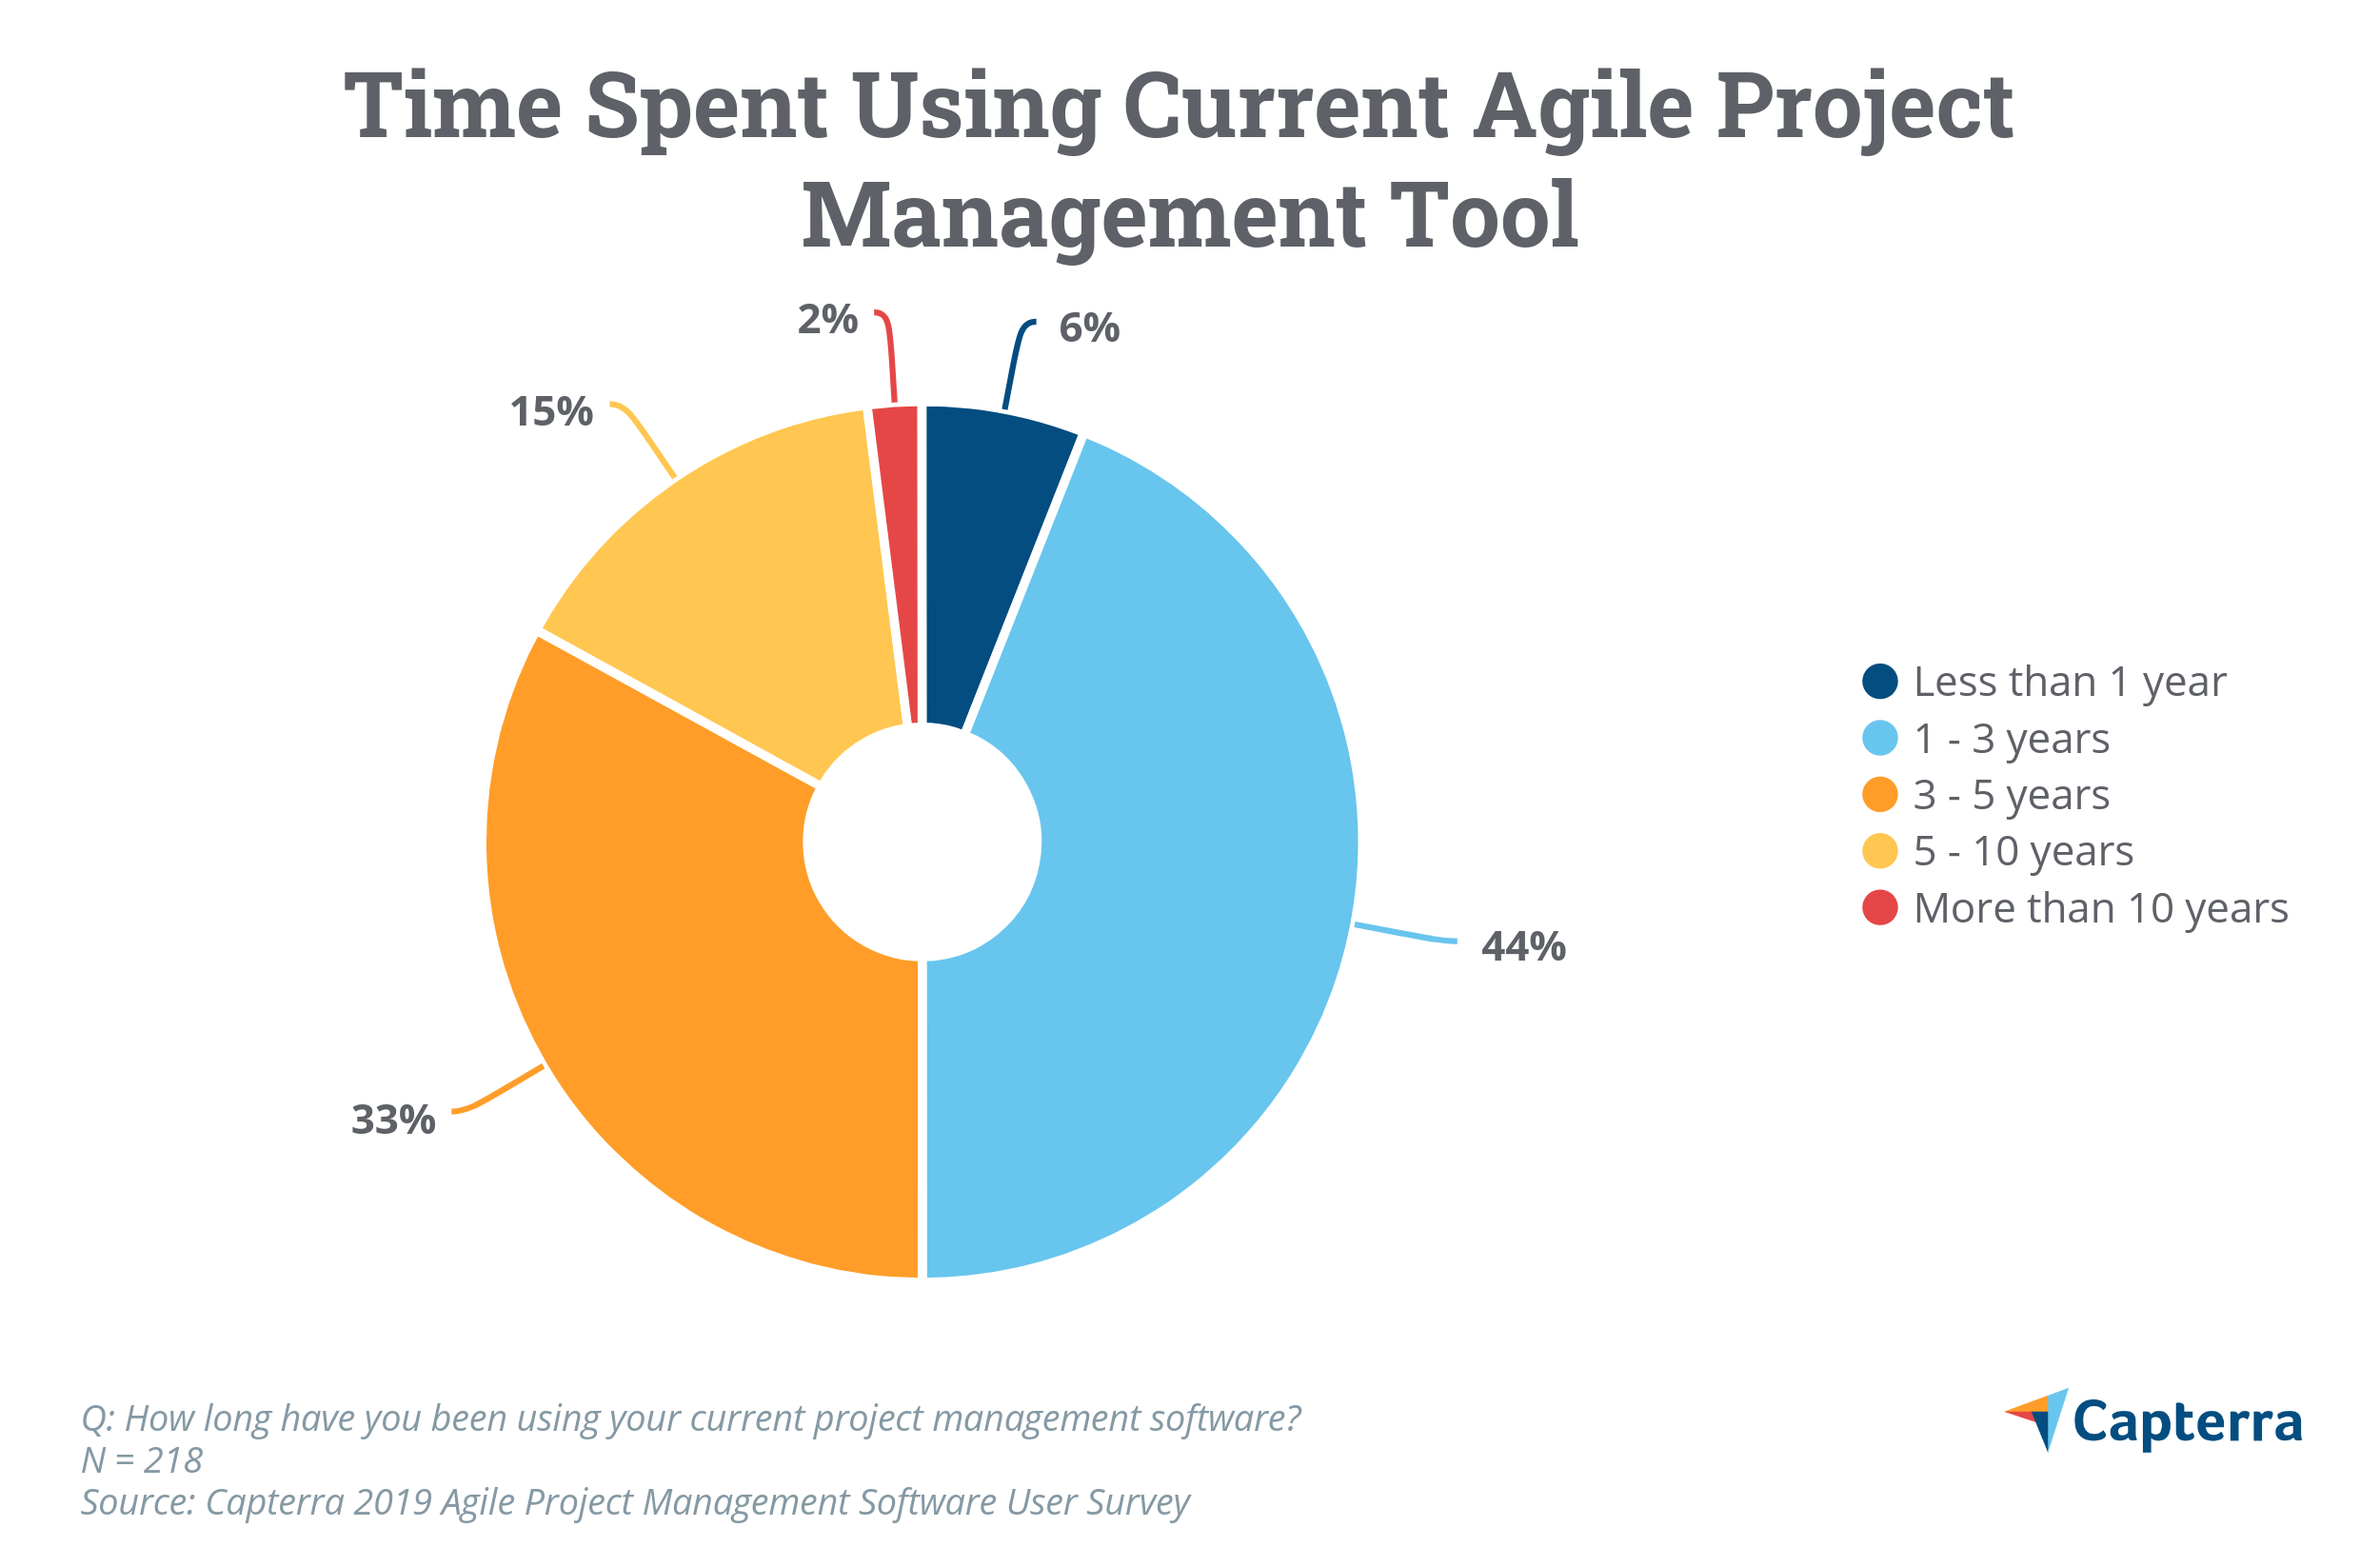 agile project management tools